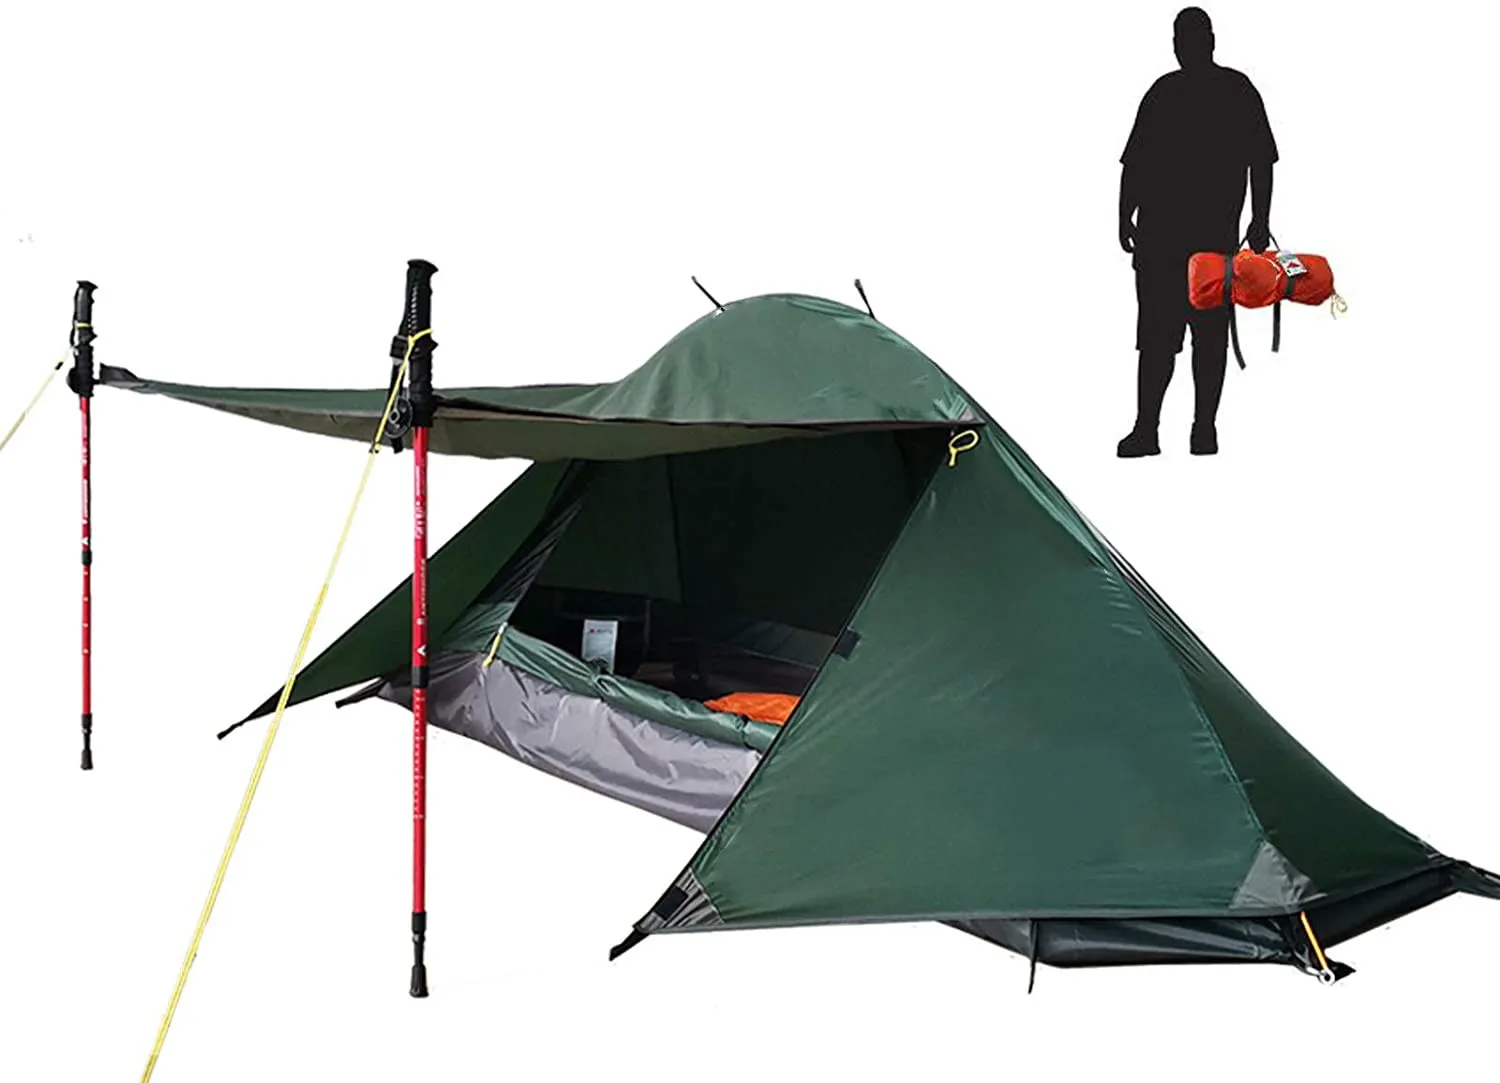 1 Person Camping Tent For Camping Rainproof Waterproof Hiking Mountain Hunting 4 Season Backpack - Buy Backpack Tent,1 Person Camping Tent,Waterproof Camping Tent Product on Alibaba.com